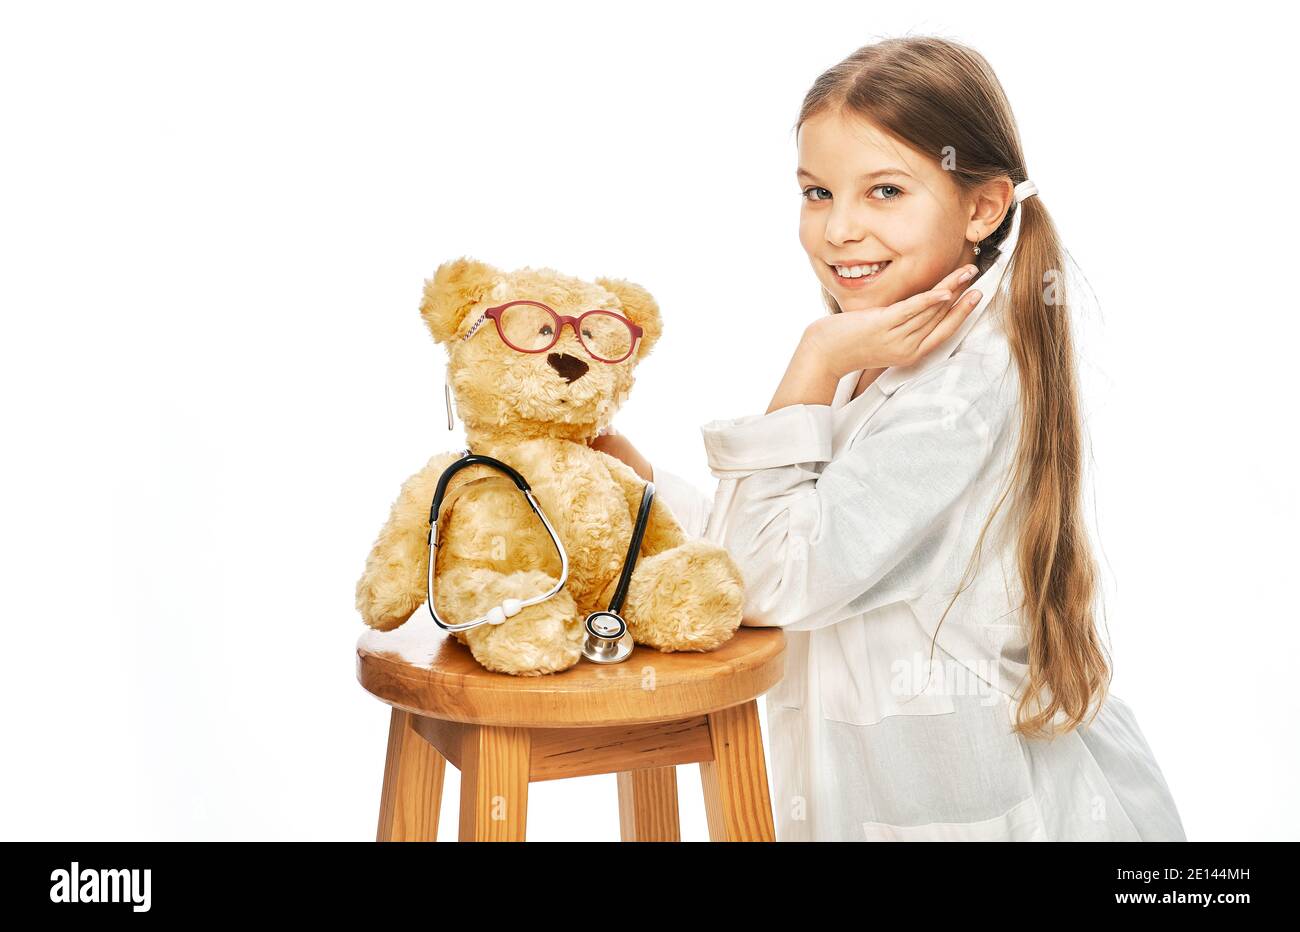 Cute girl playing in doctor profession with a bear toy. Child's hobby and future medical occupation Stock Photo